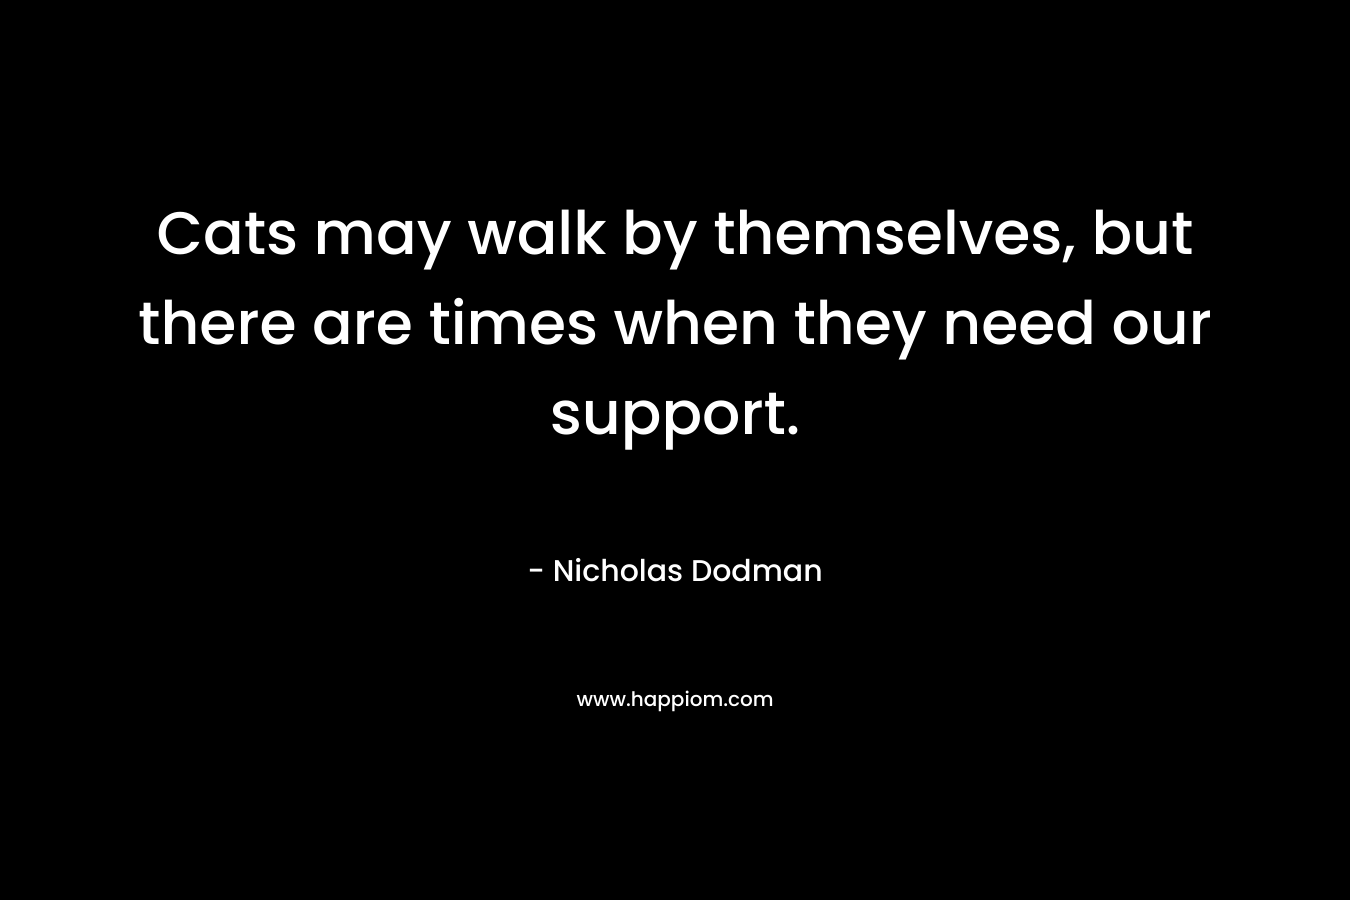 Cats may walk by themselves, but there are times when they need our support.